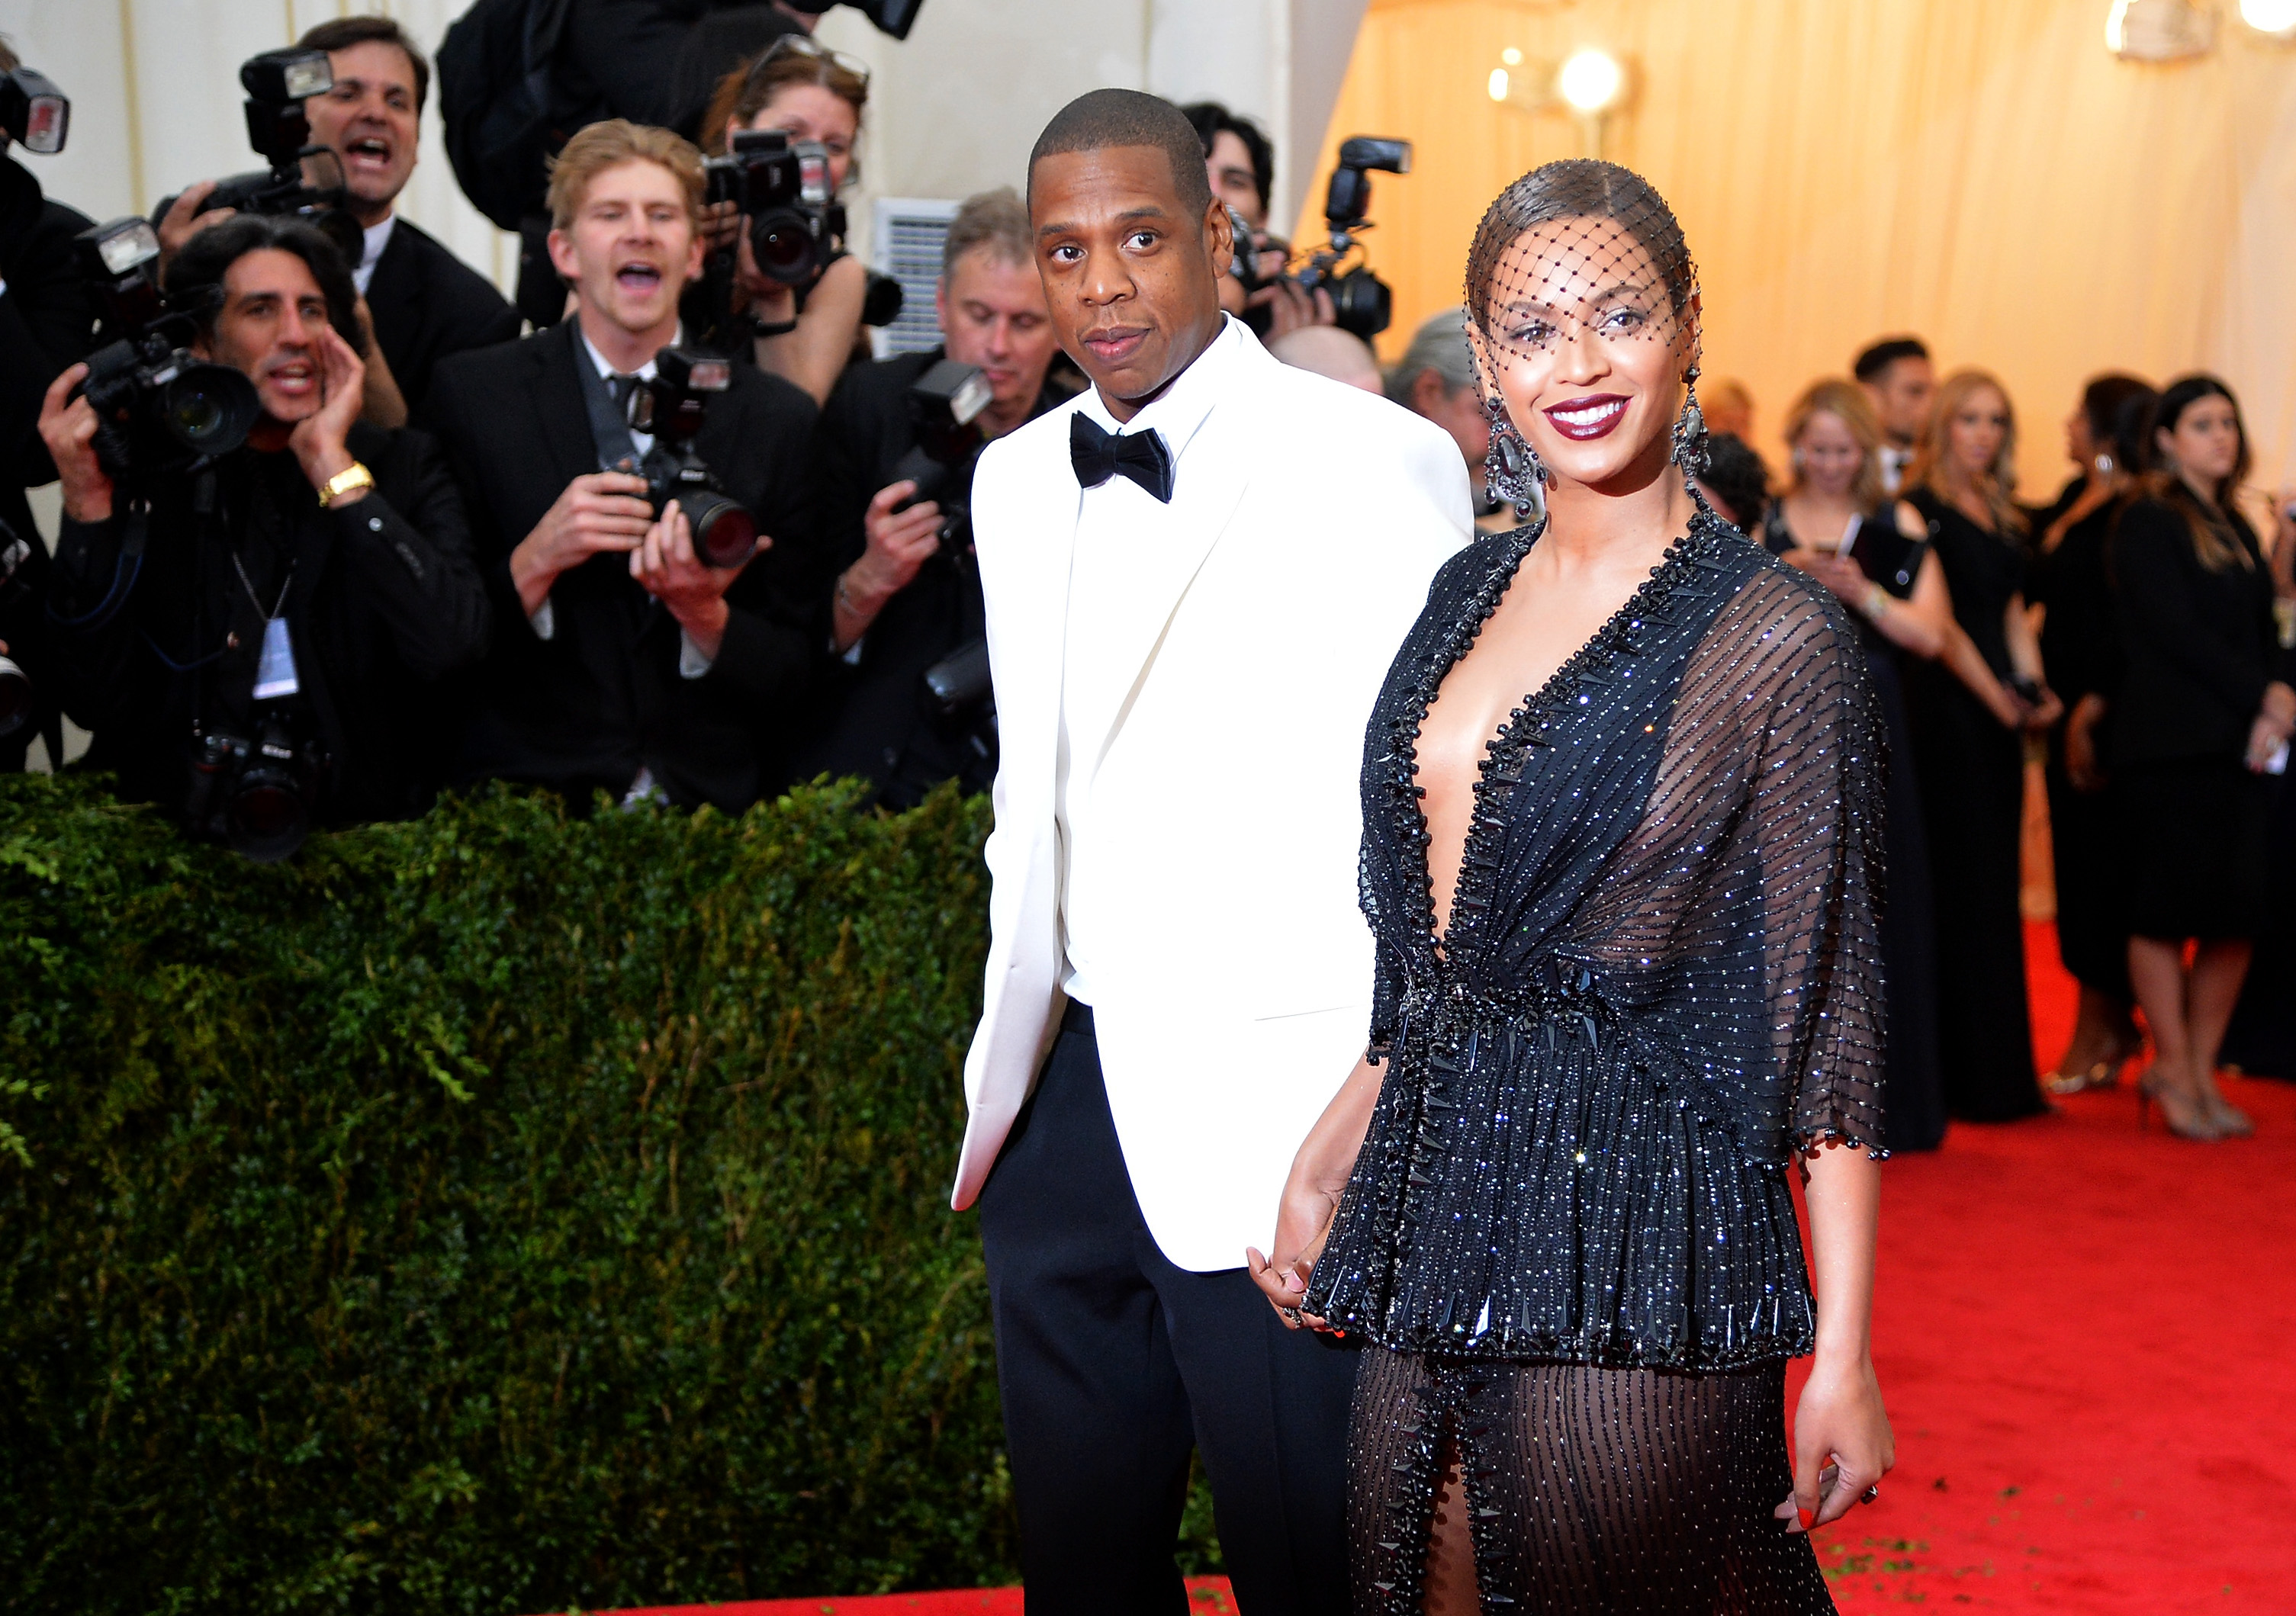 Beyoncé And Solange’s Dad Breaks Silence Over Infamous Jay-Z Elevator Fight